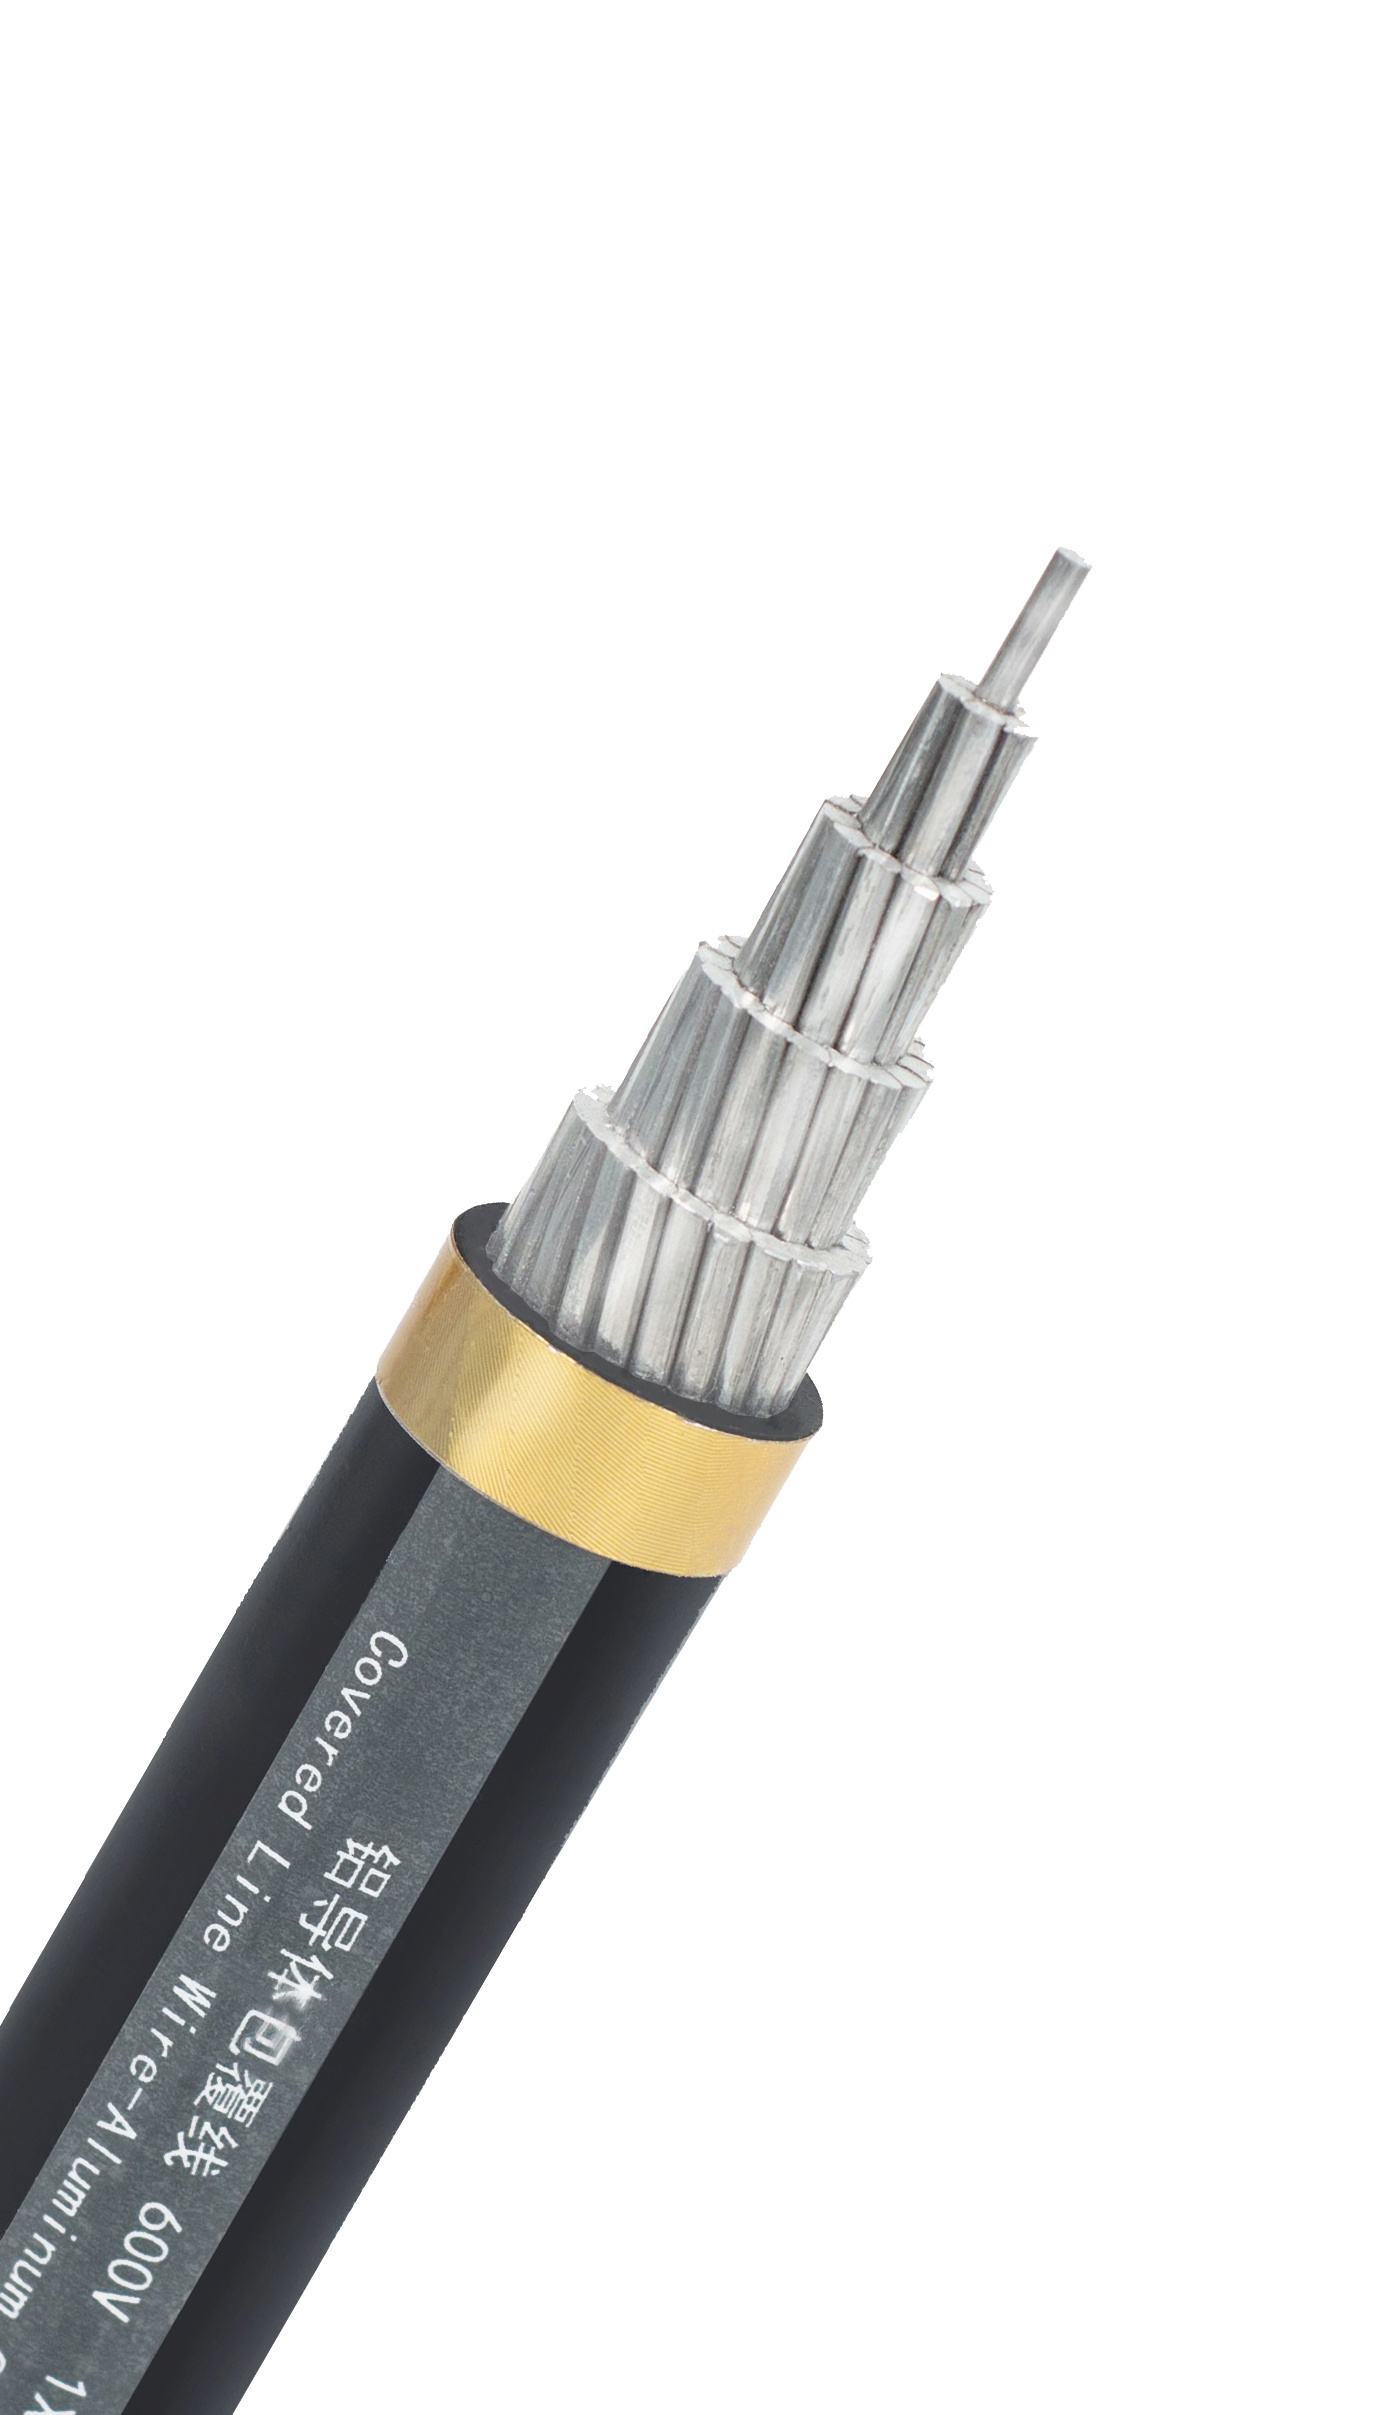 High Temperature Heat Resistance Insulation Rubber Insulated Silicon Cable 22 AWG 24AWG 26AWG 28AWG Silicone Wire